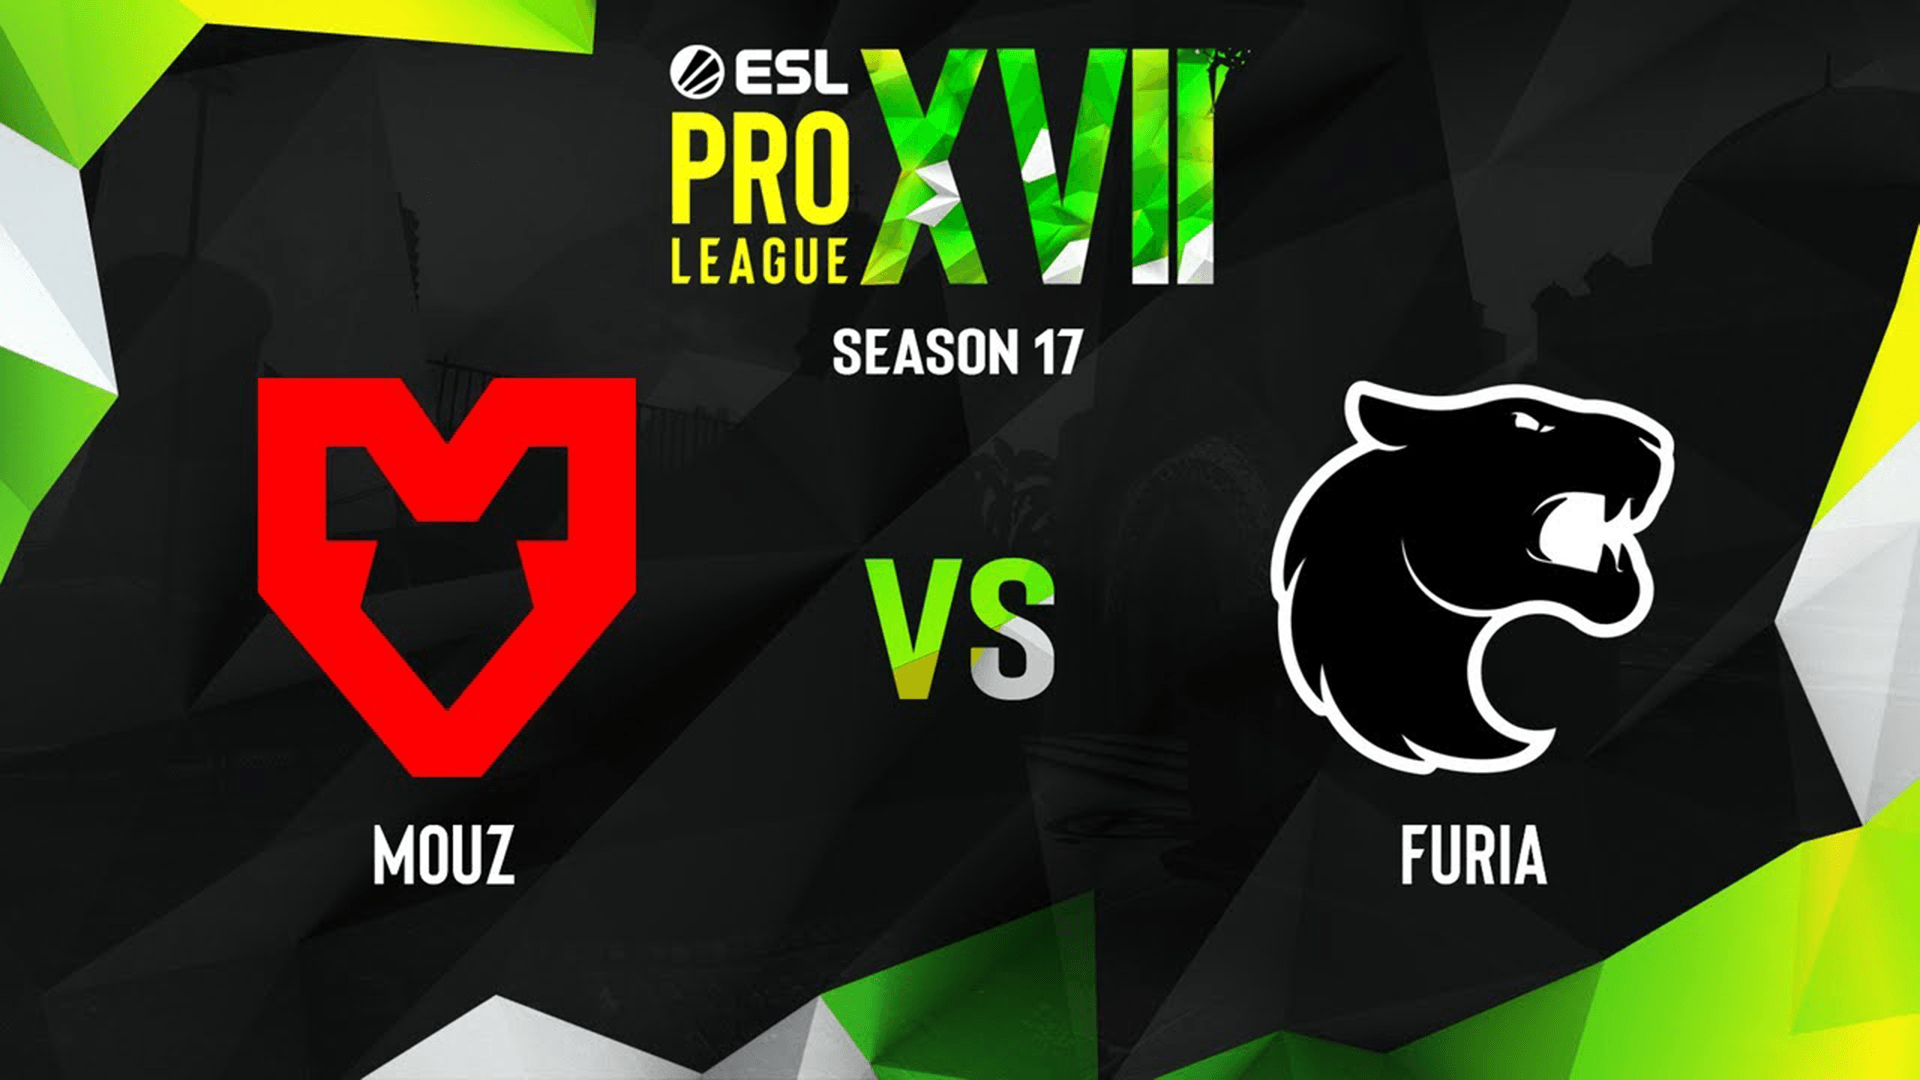 CSGO: FURIA ends up winning the Brazilian derby at EPL S17